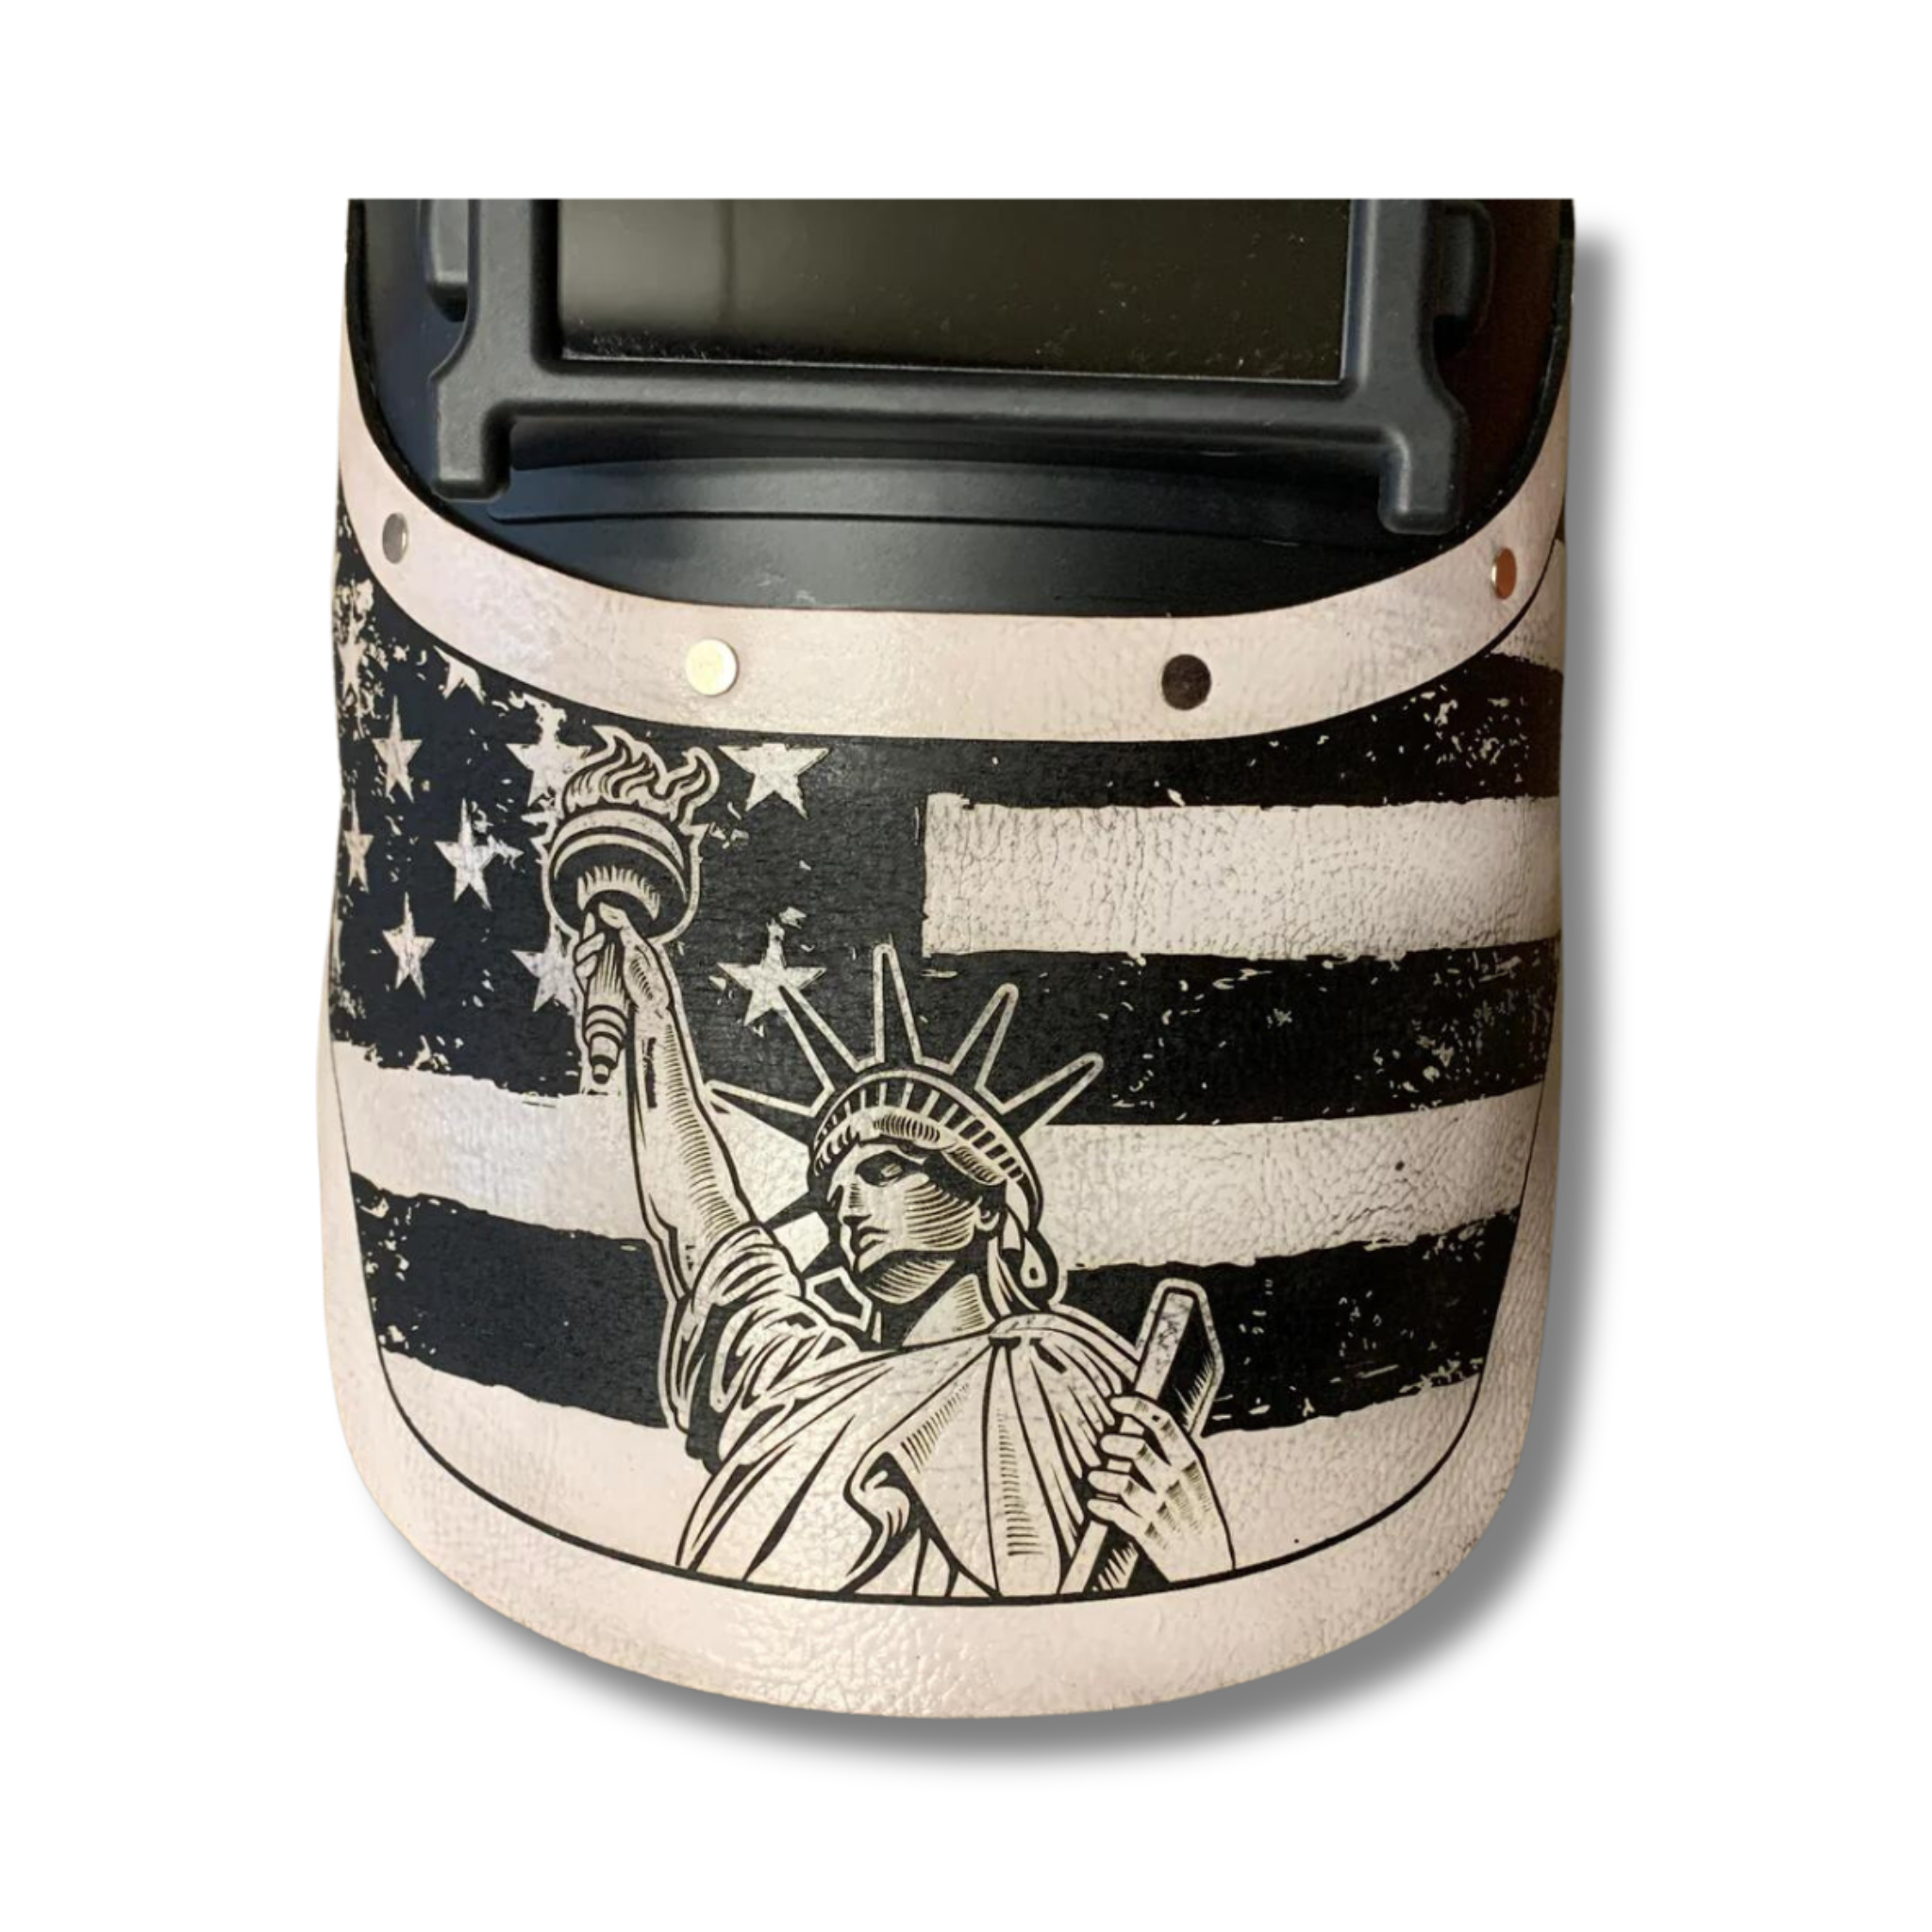 Outlaw Leather - Welding Hood - Statue of Liberty